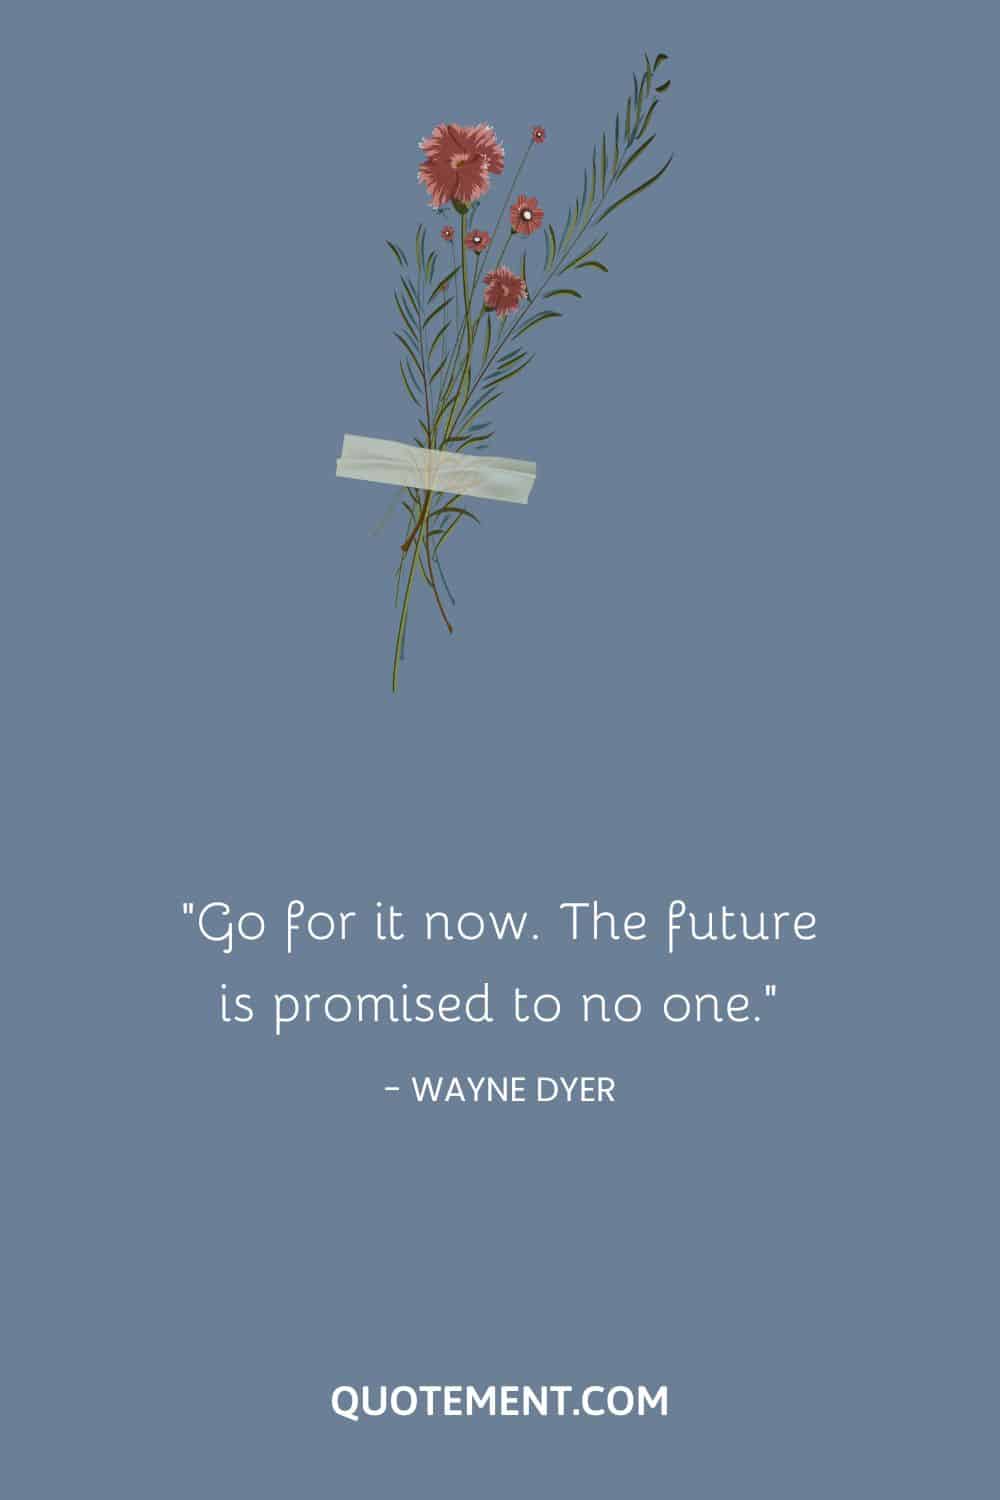 Go for it now. The future is promised to no one